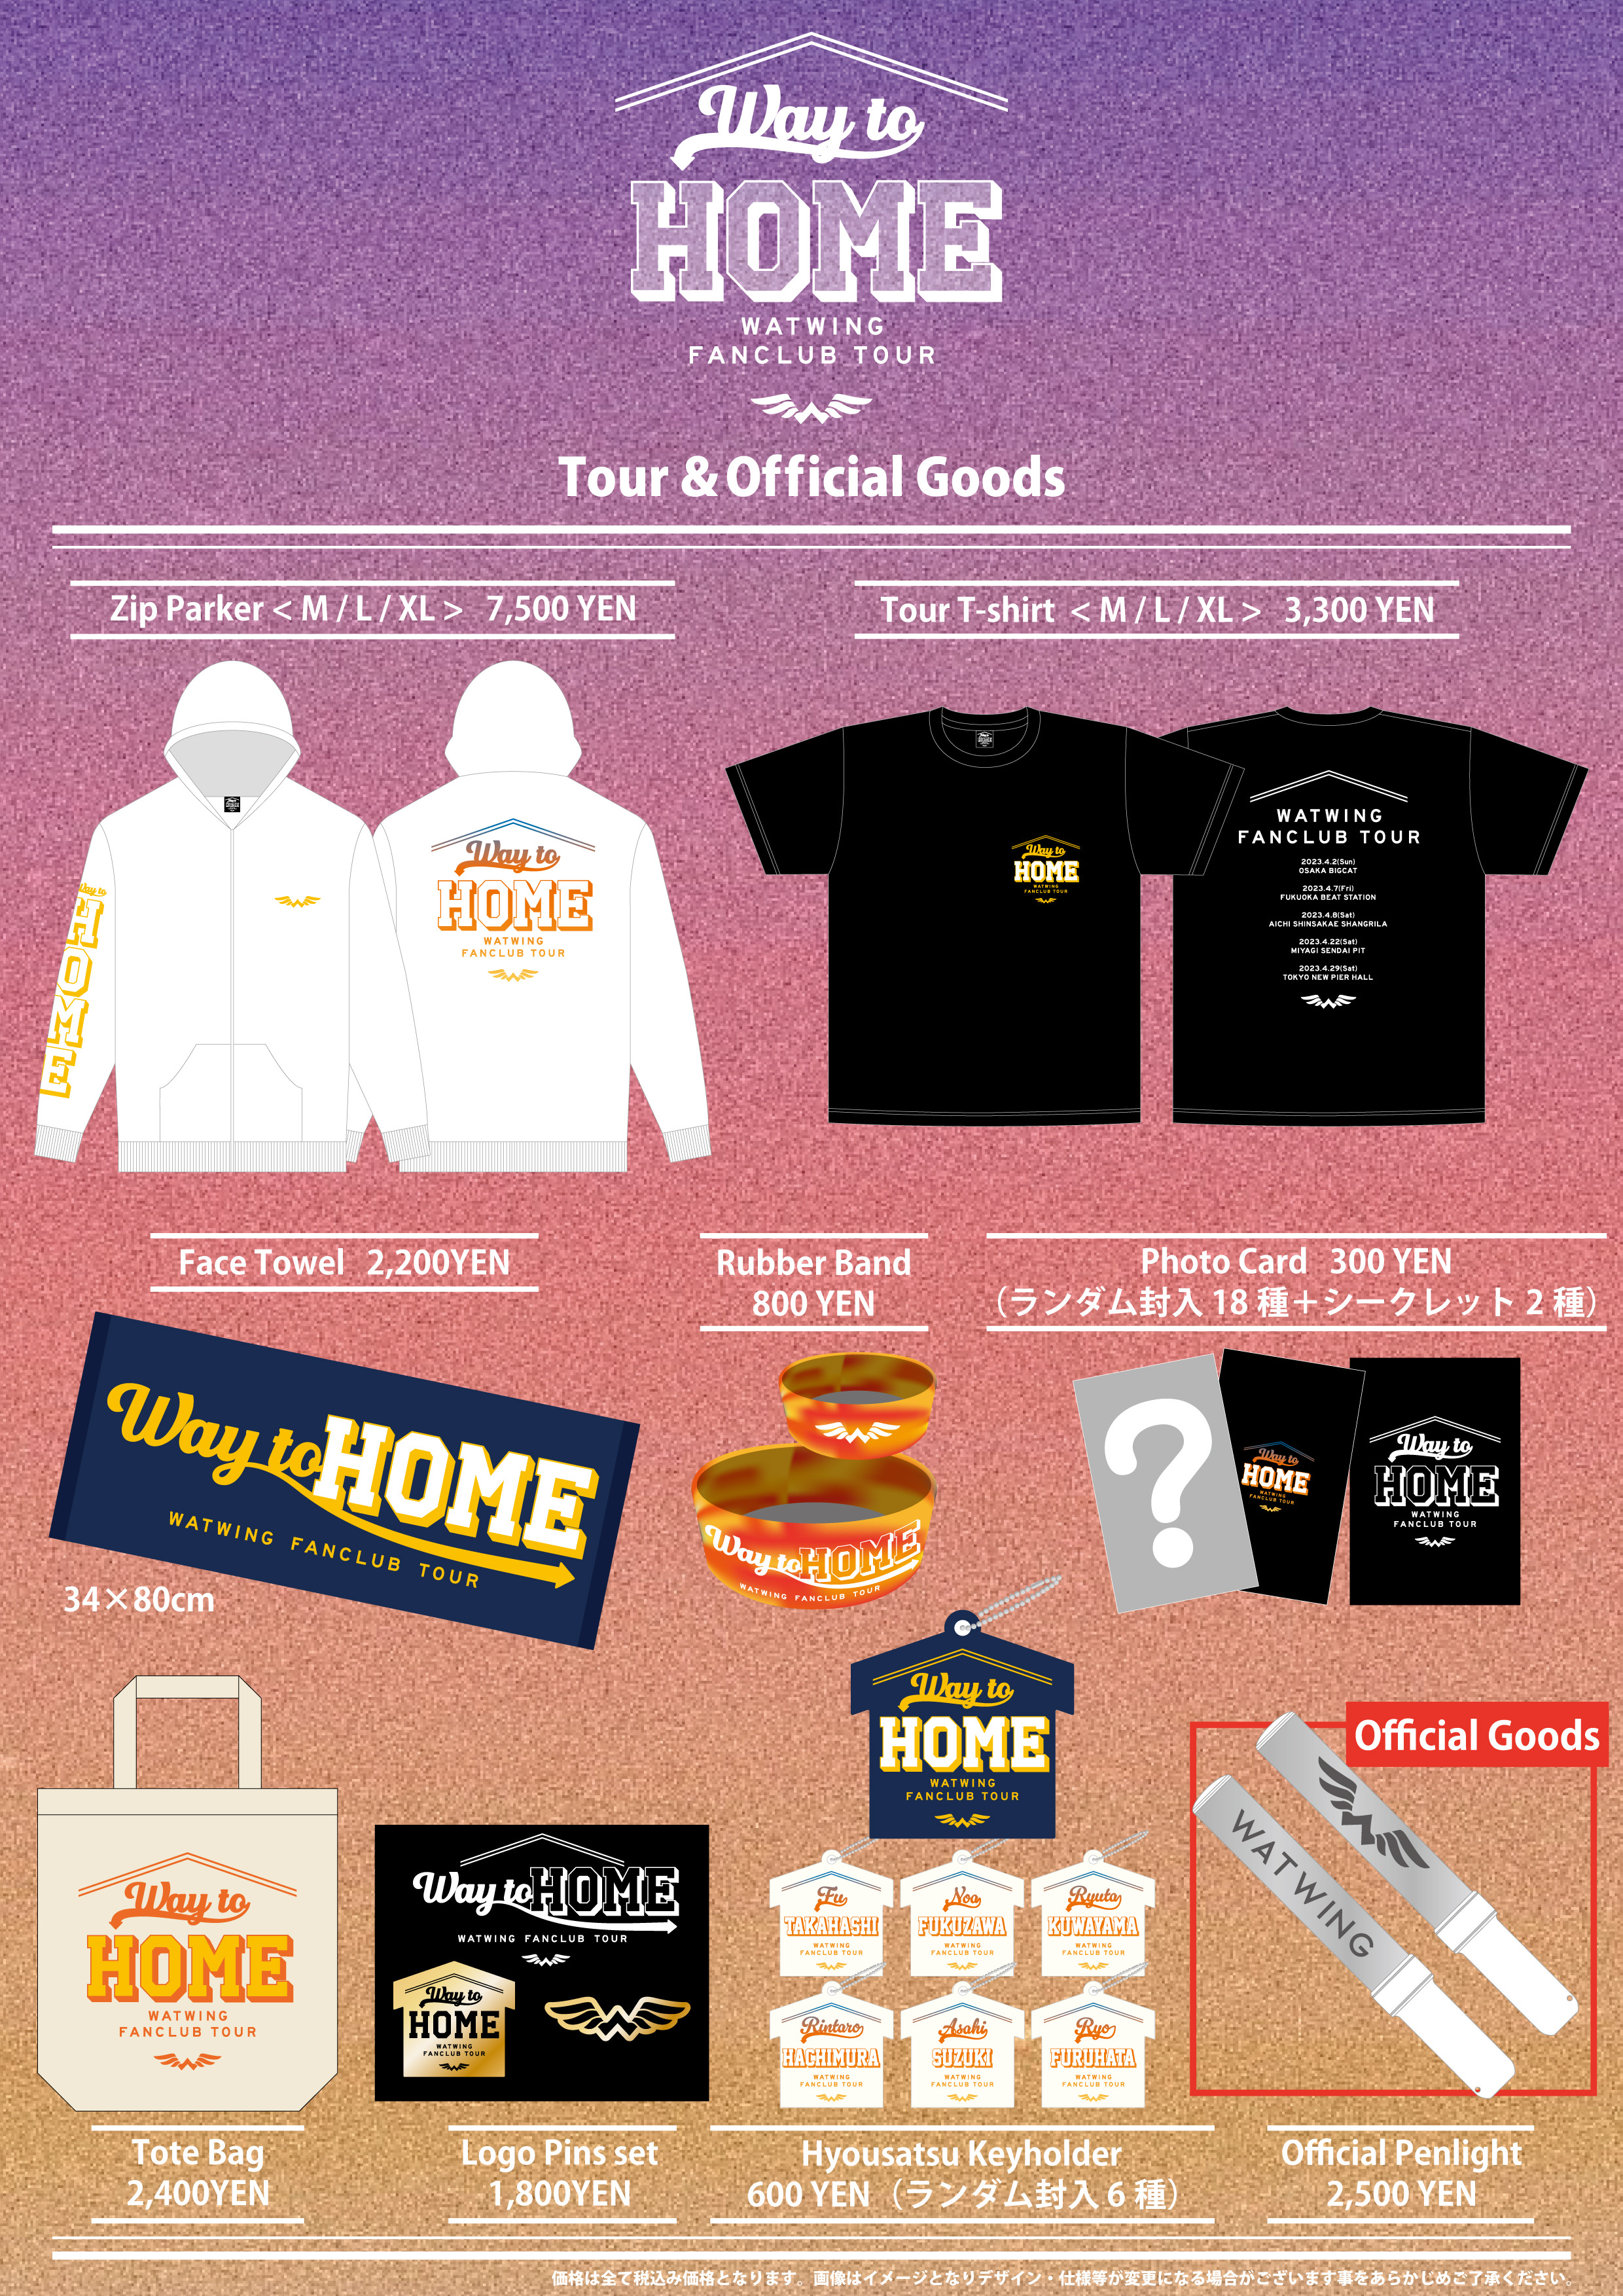 WATWING FANCLUB TOUR～Way to HOME～』グッズ 公開！｜WATWING